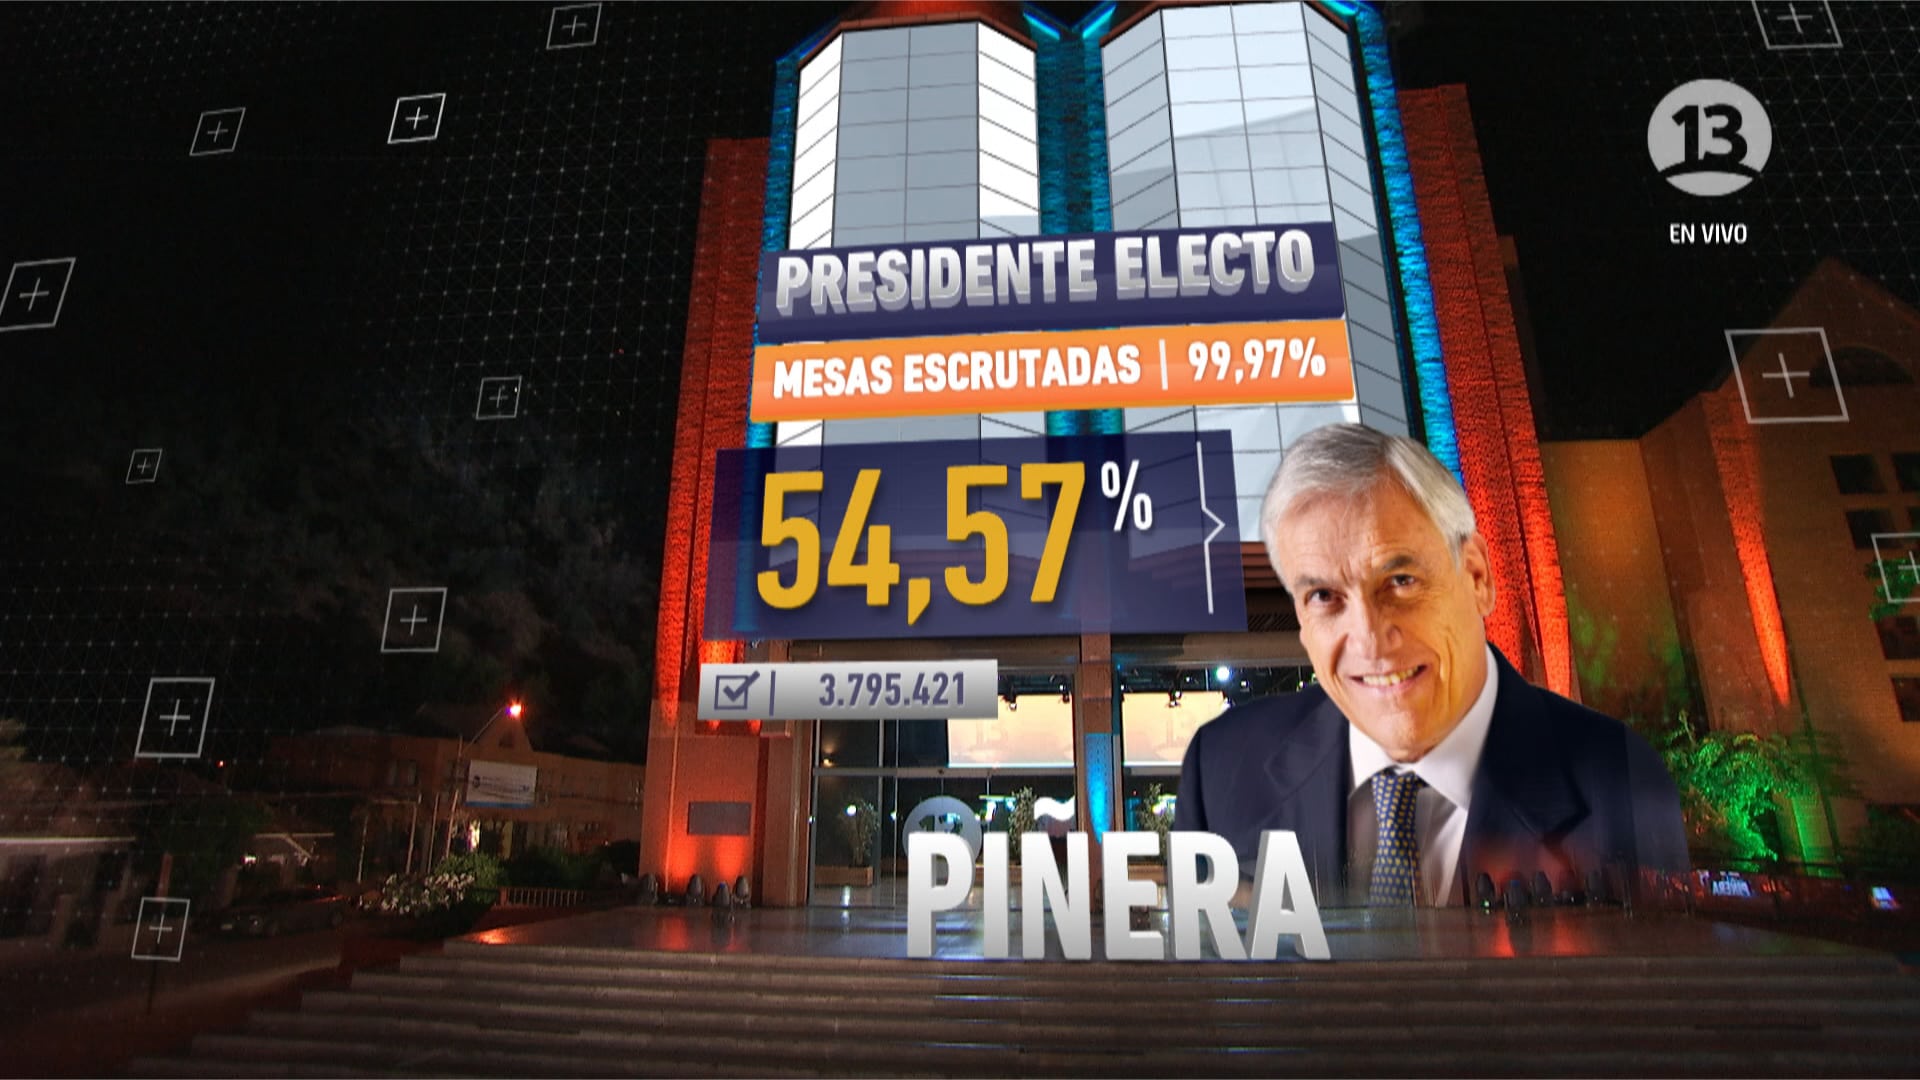 Girraphic Canal 13 Chile Elections 2017